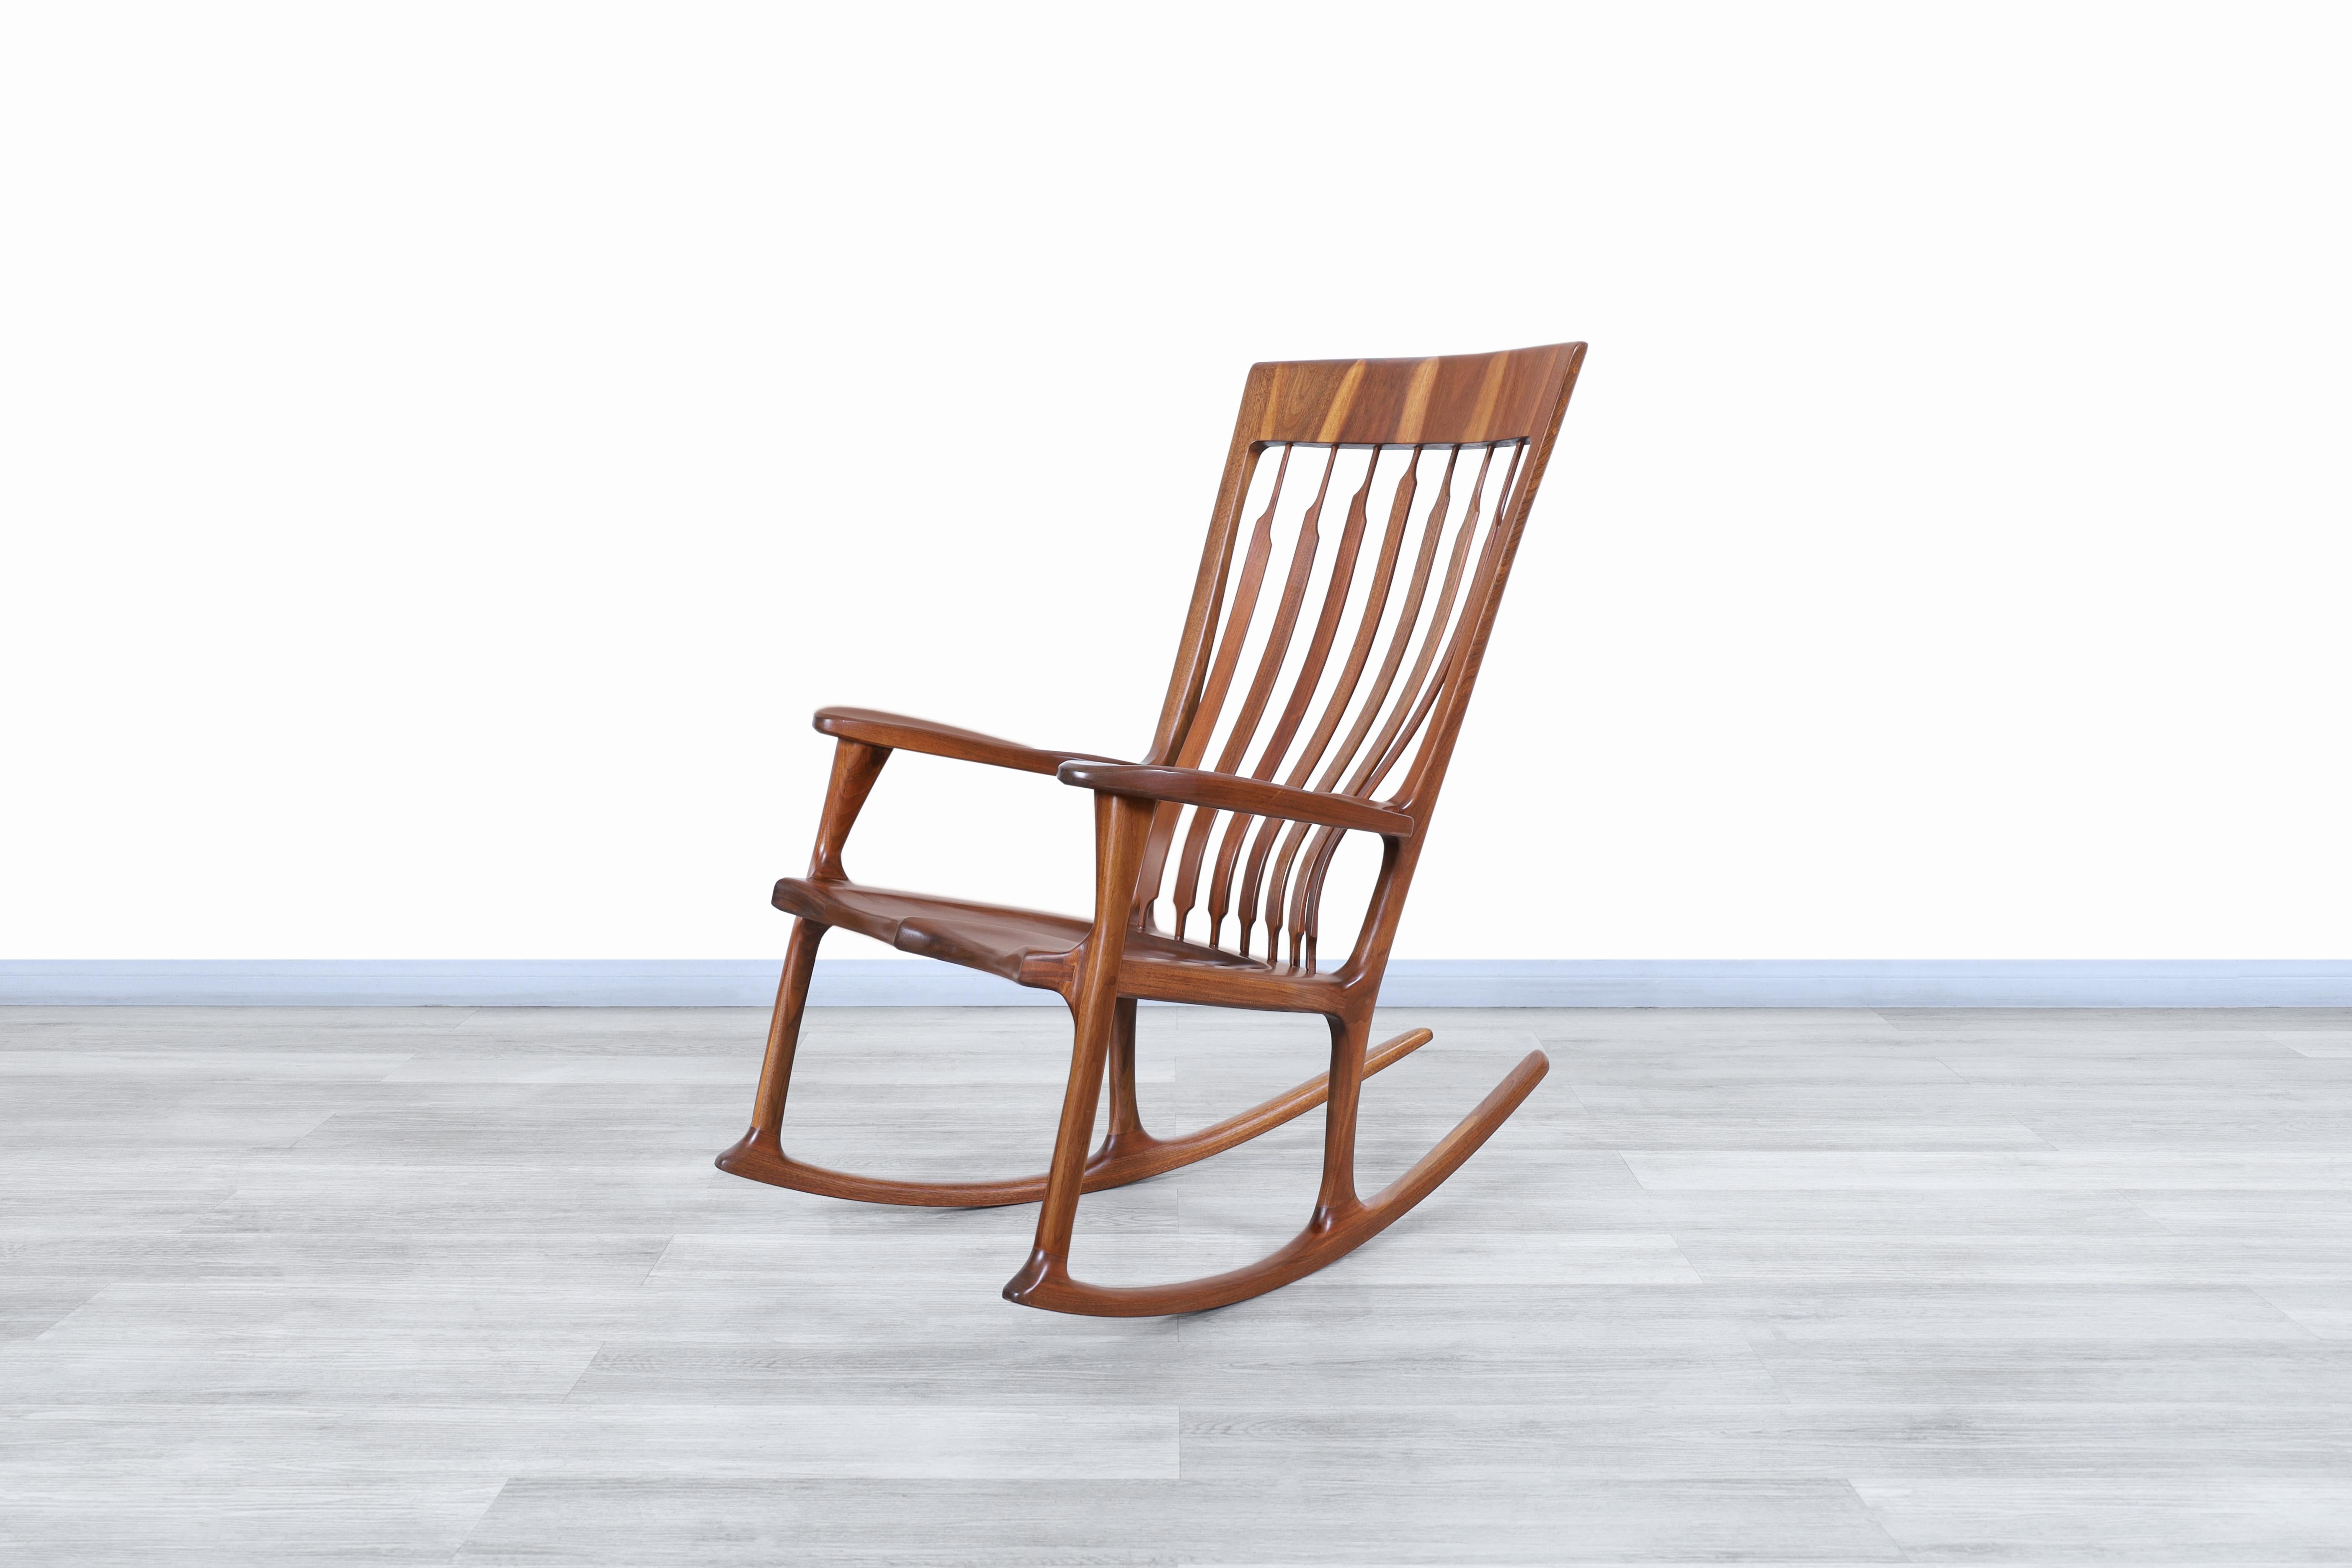 Beautiful vintage 20th century American studio Craft walnut rocking chair designed in the United States. This rocking chair has a design inspired by the most representative models of Sam Maloof, where attention to detail was made to imitate both his